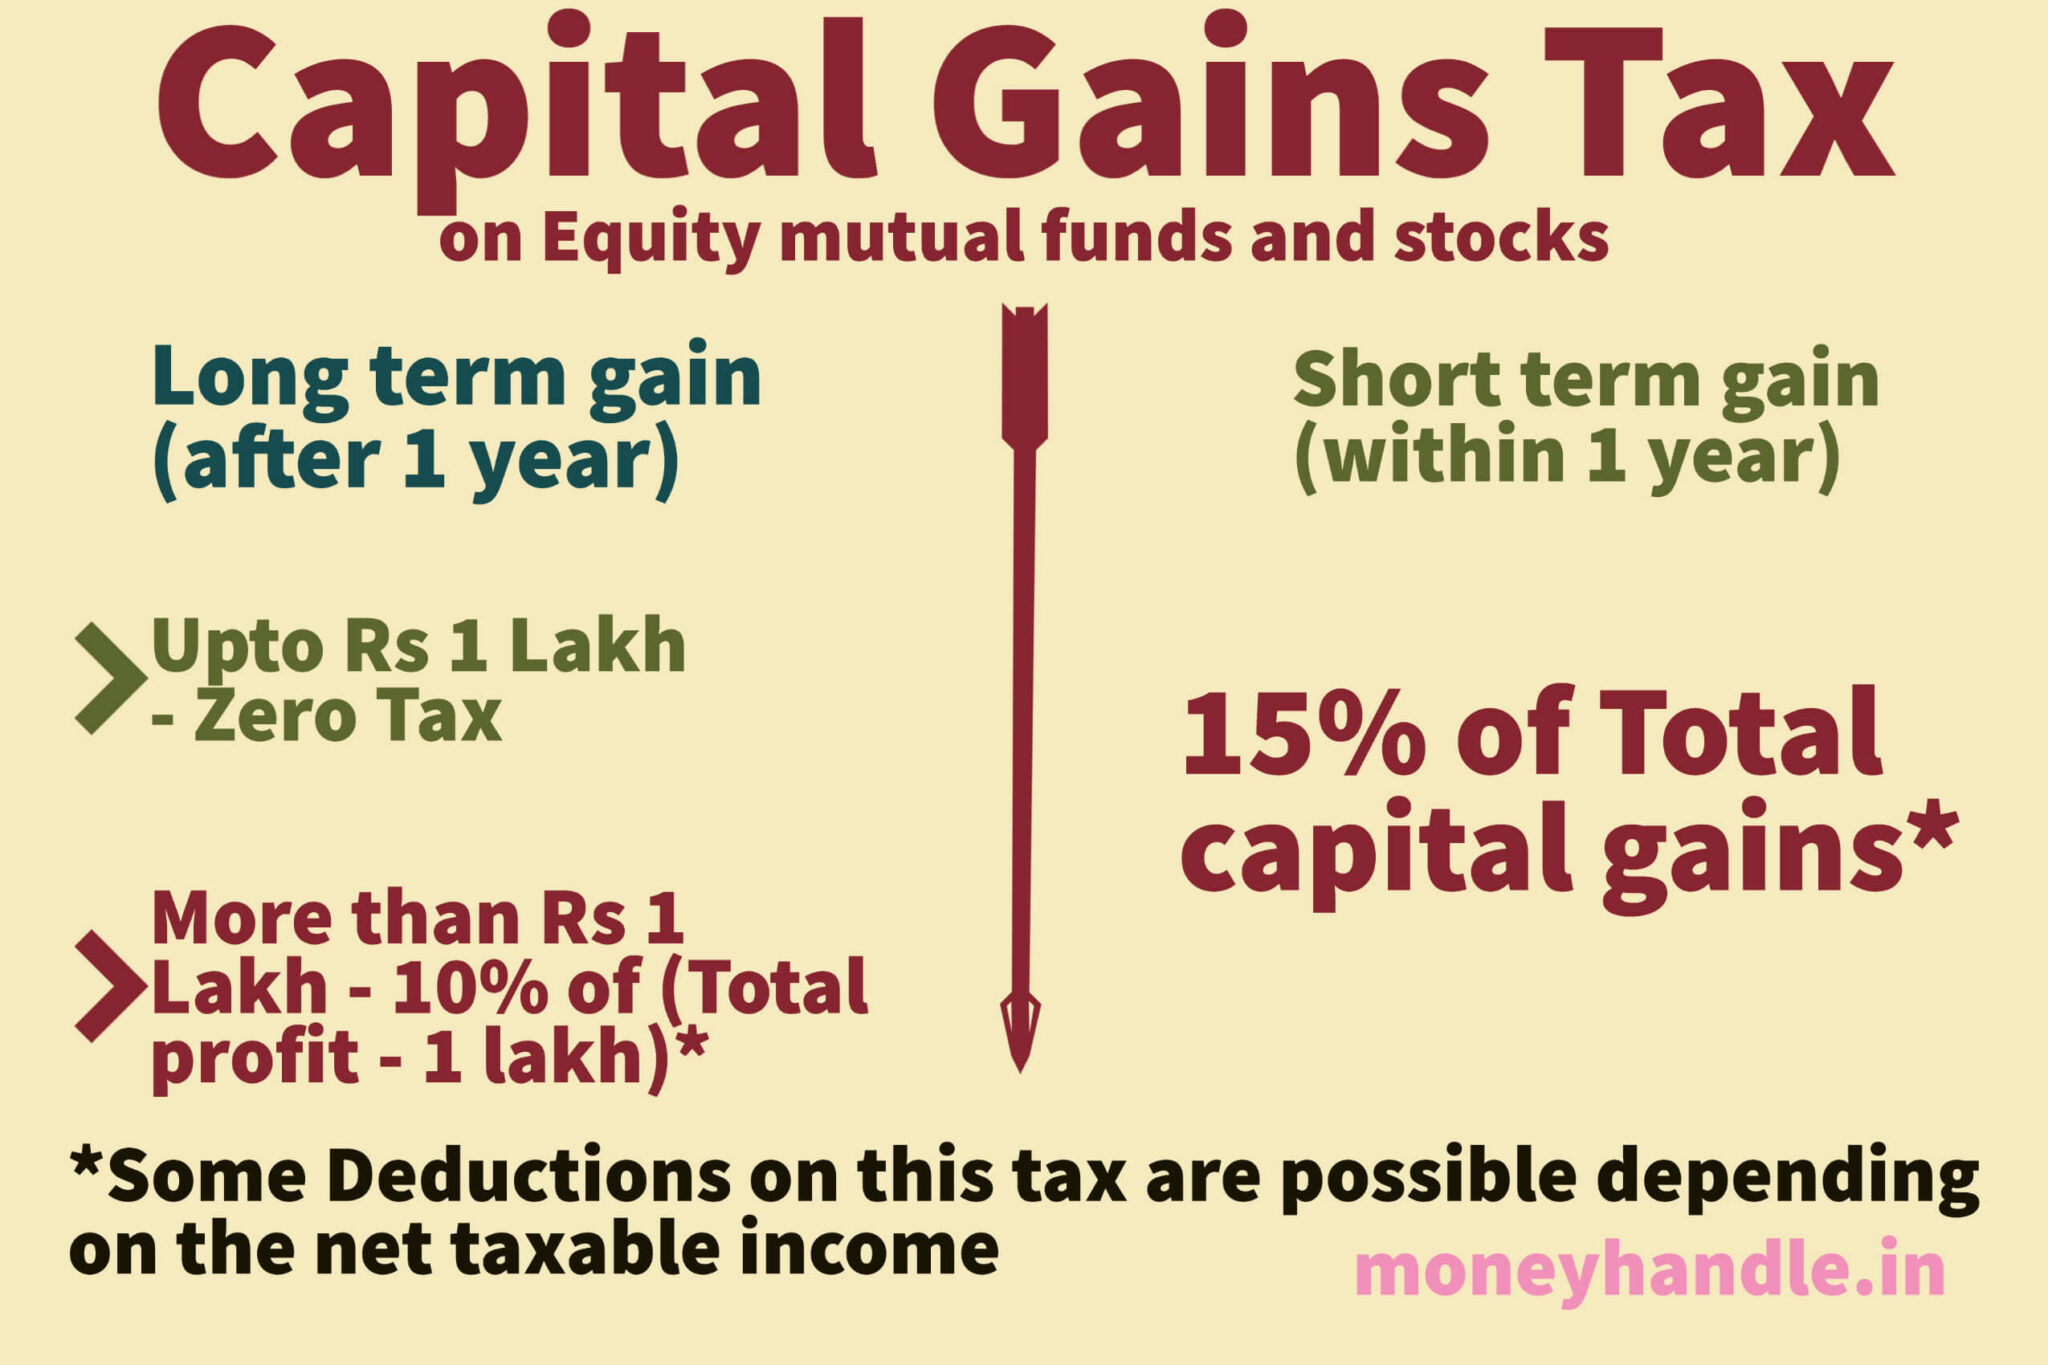 Capital gains tax (India) simplified - Read this if you invest in stocks